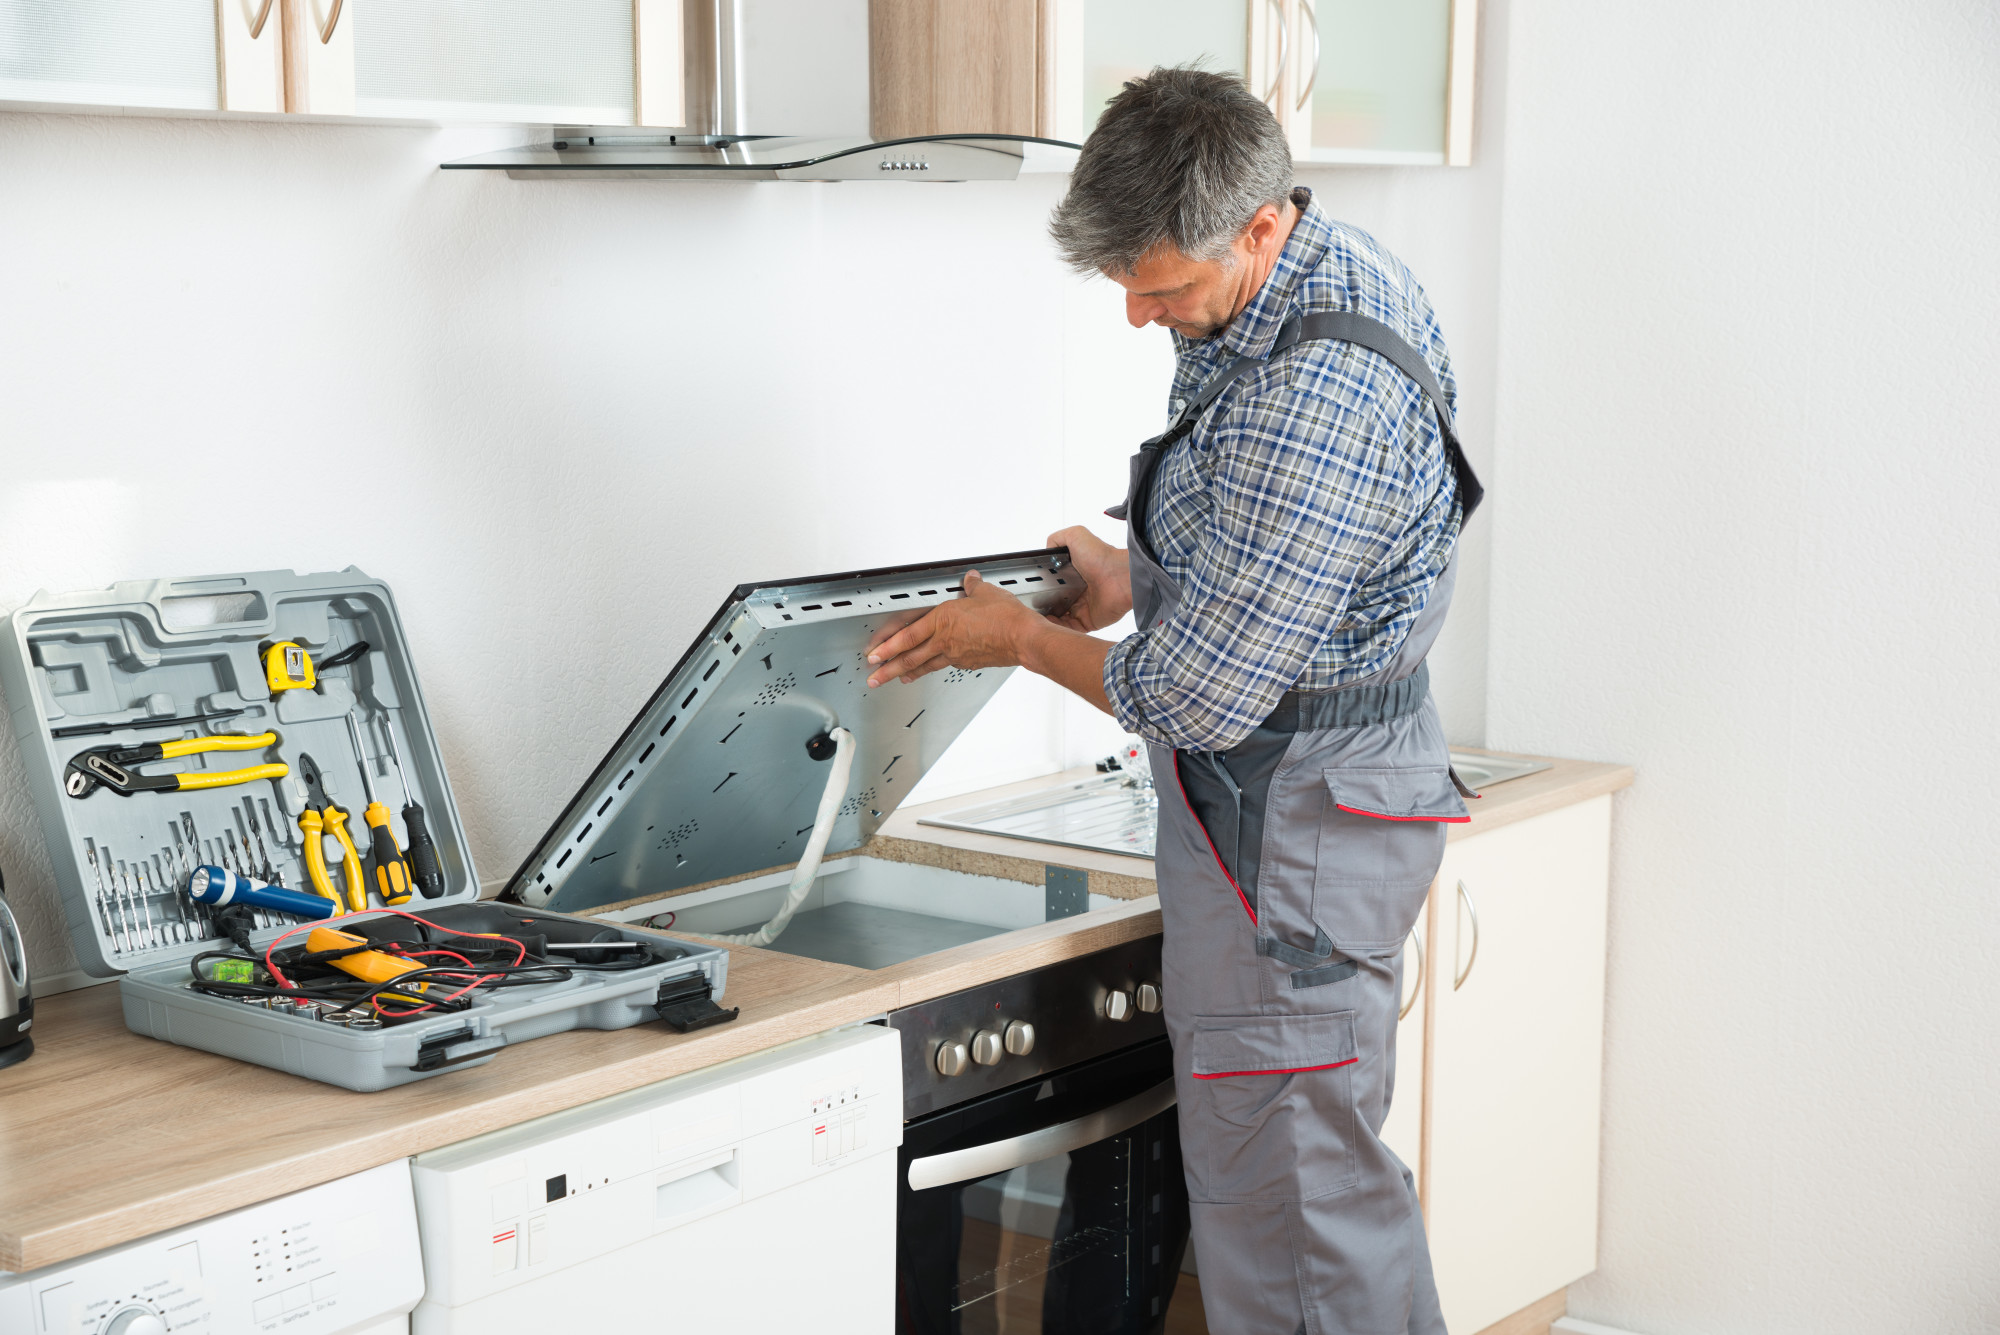 As a homeowner, it is important to know about common appliance repairs you may run into. Here are 7 of the most common appliance repairs.